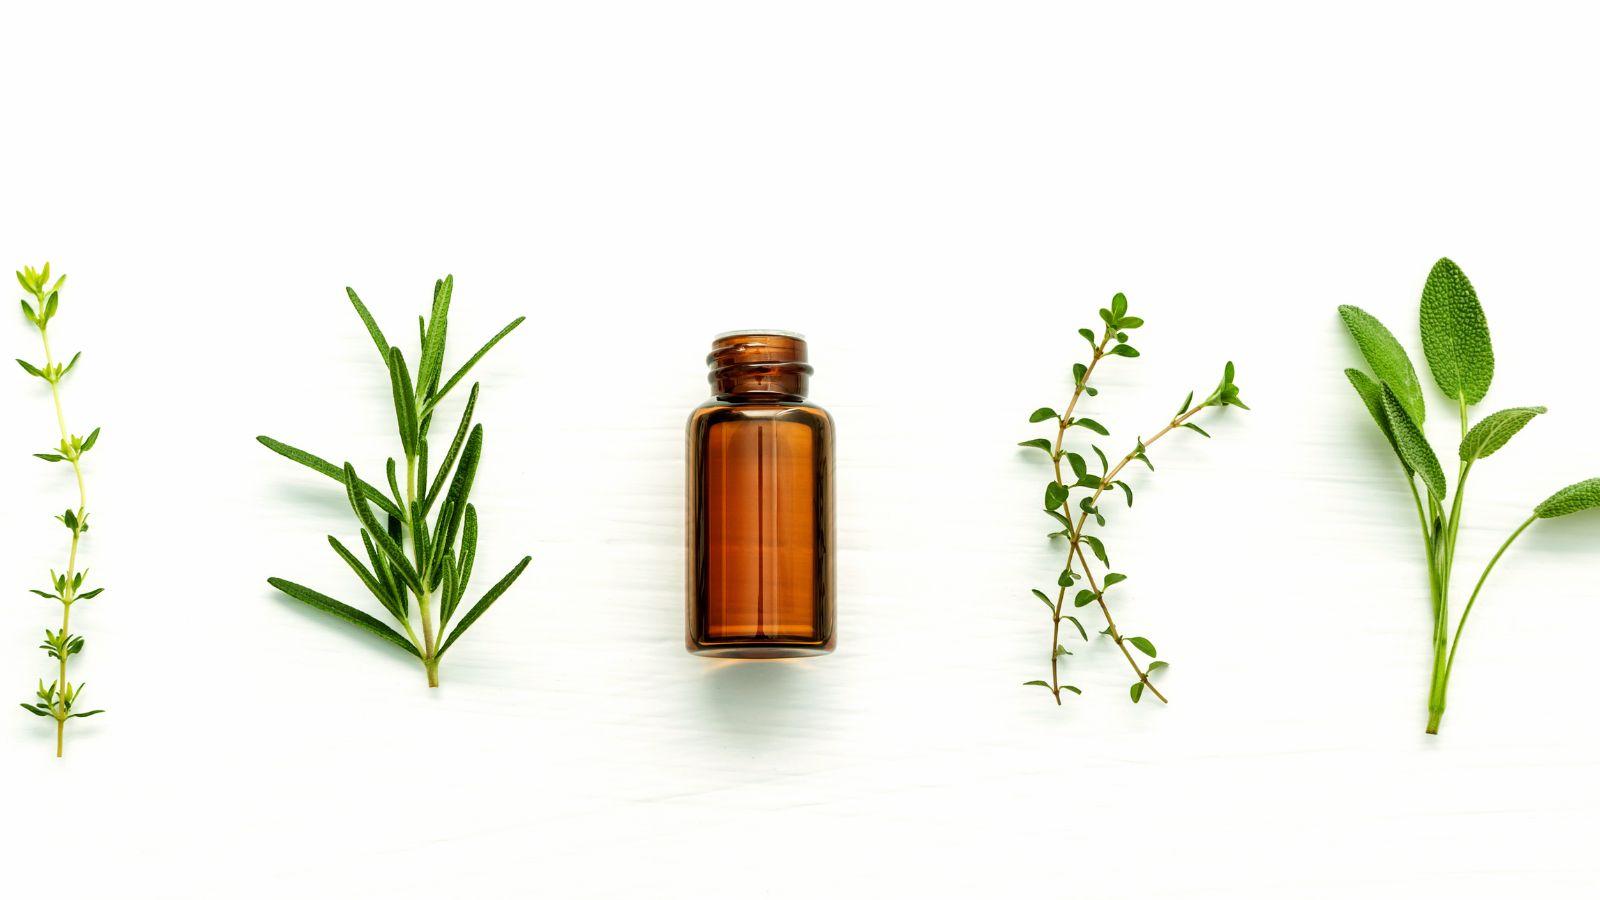 favourite essential oils. image shows a white background with an essential oil bottle surrounded by herbs